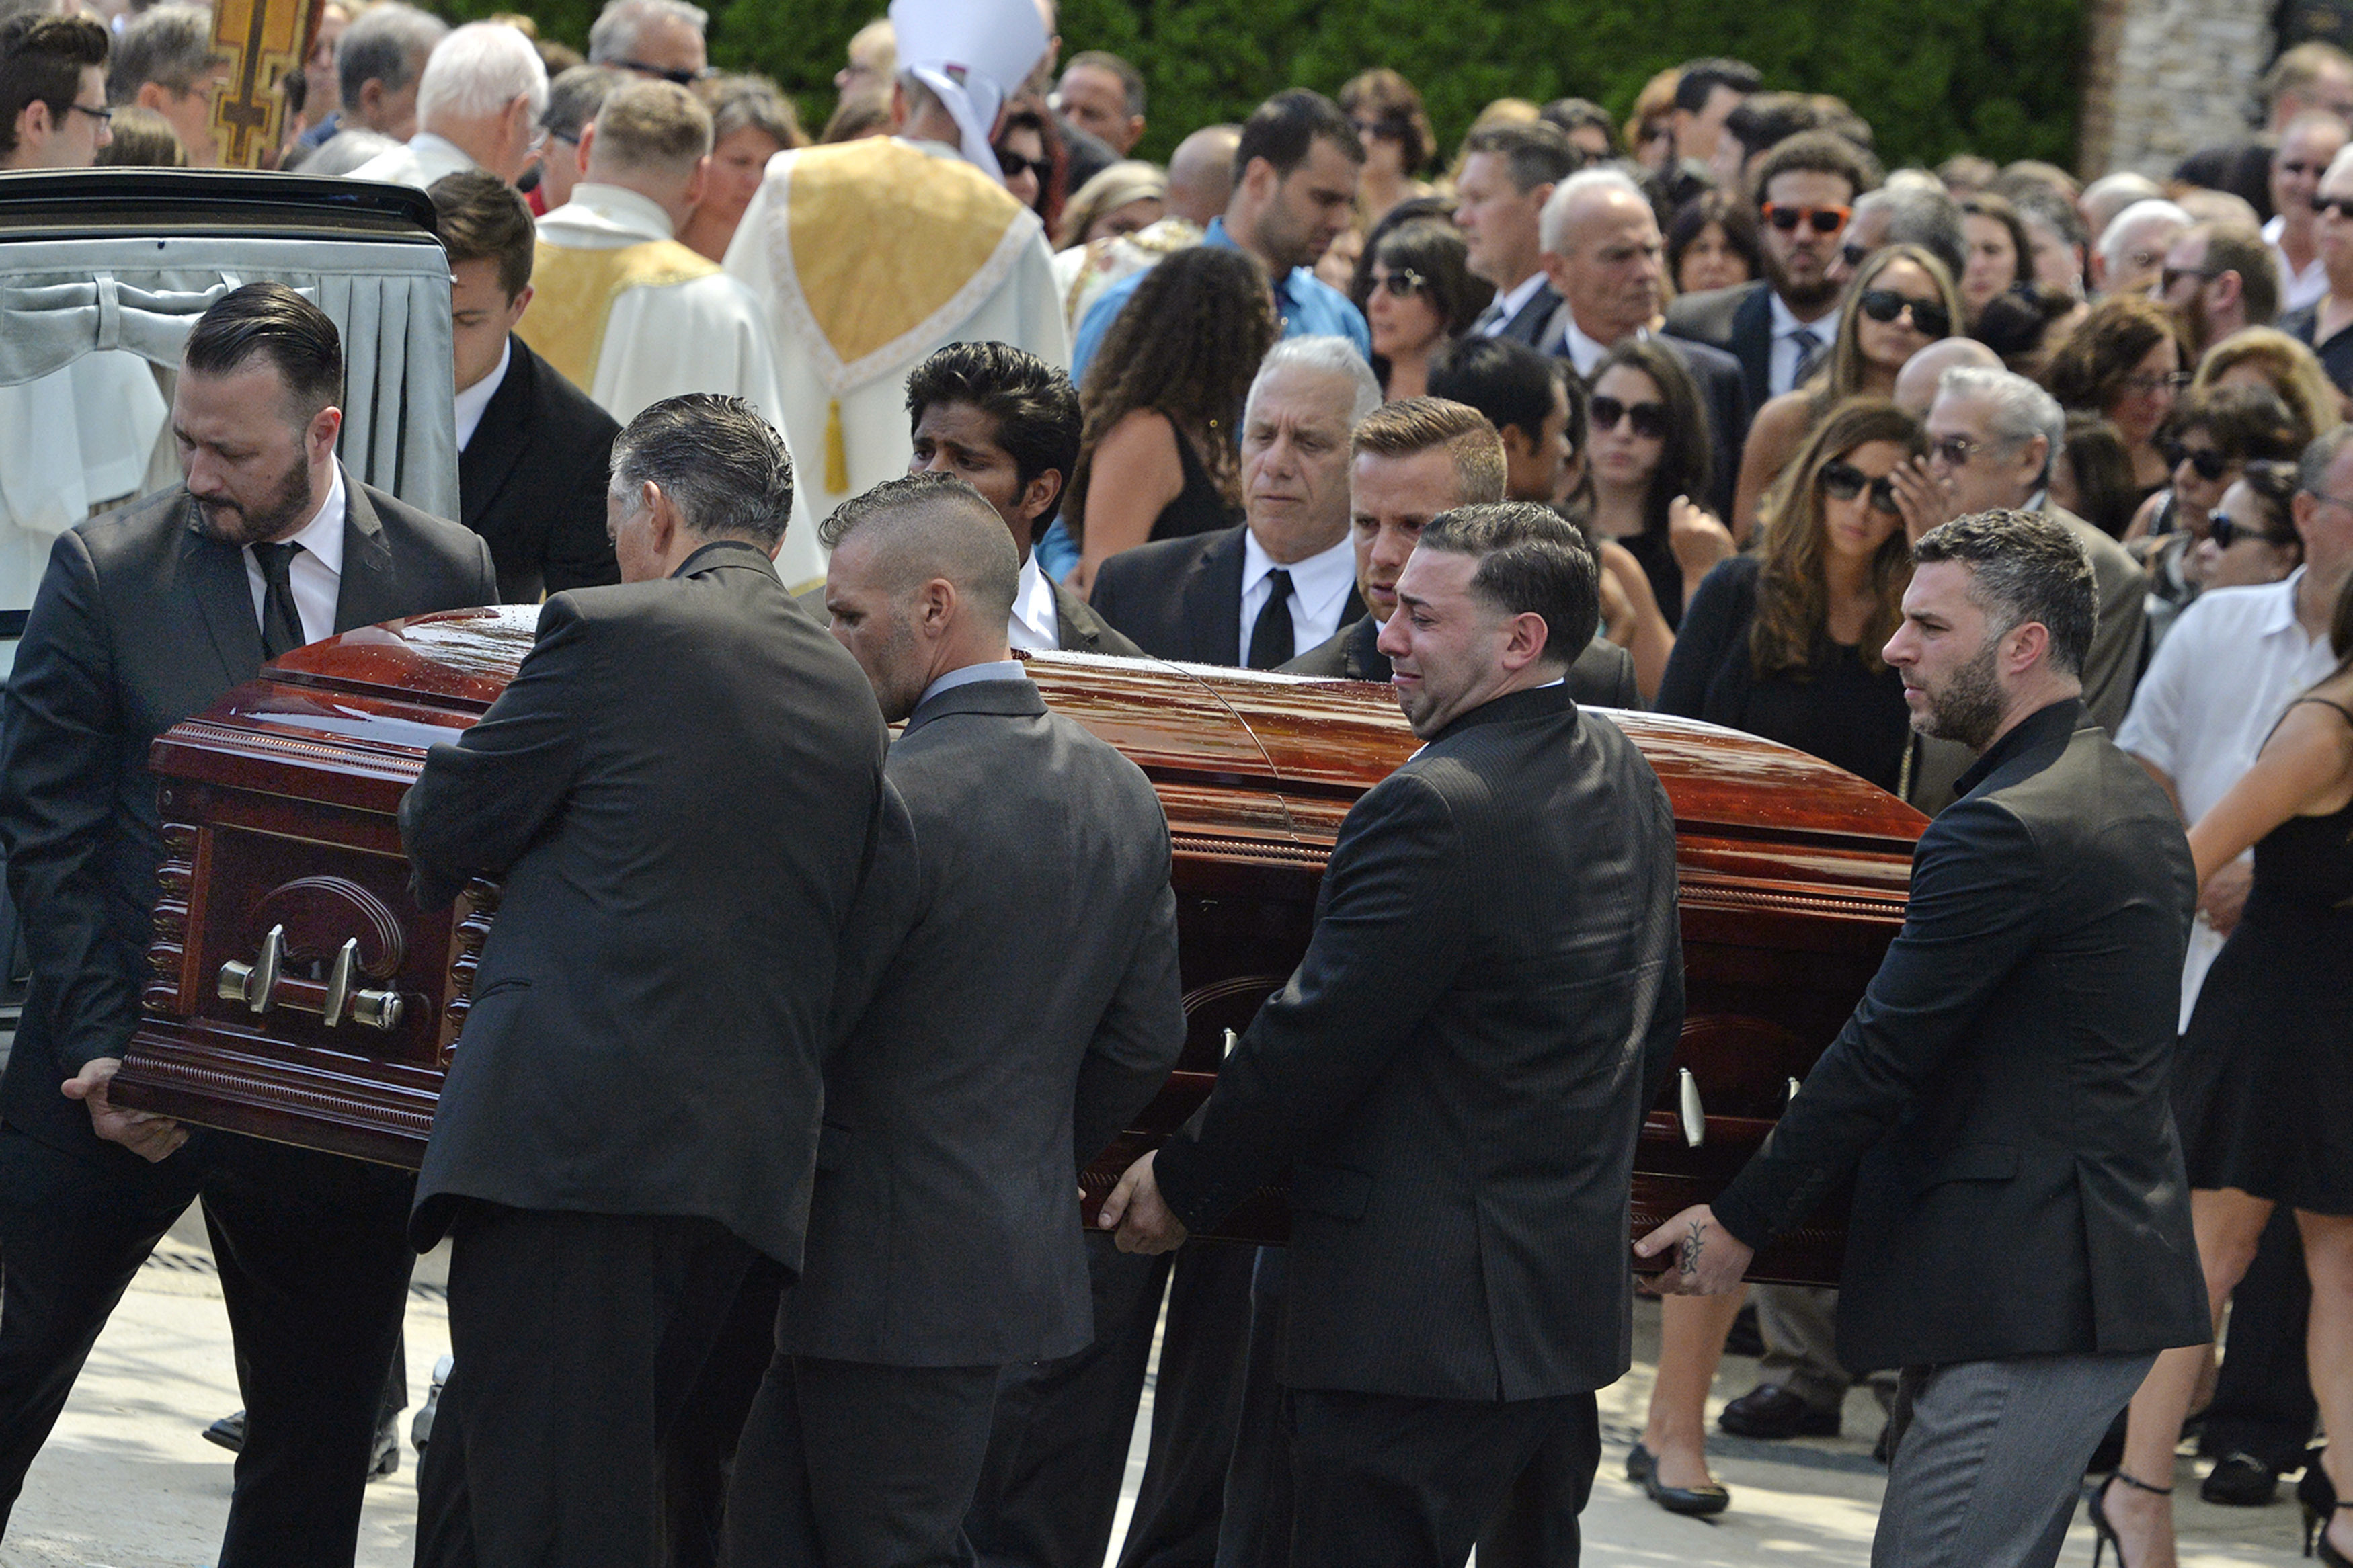 Mourners carry the casket of Karina Vetrano from St. Helen's Church following her funeral in Queens, New York on Aug. 6, 2016. Vetrano was killed while running alone during daylight hours through a Queens park the previous week. (Steven Sunshine&mdash;AP)